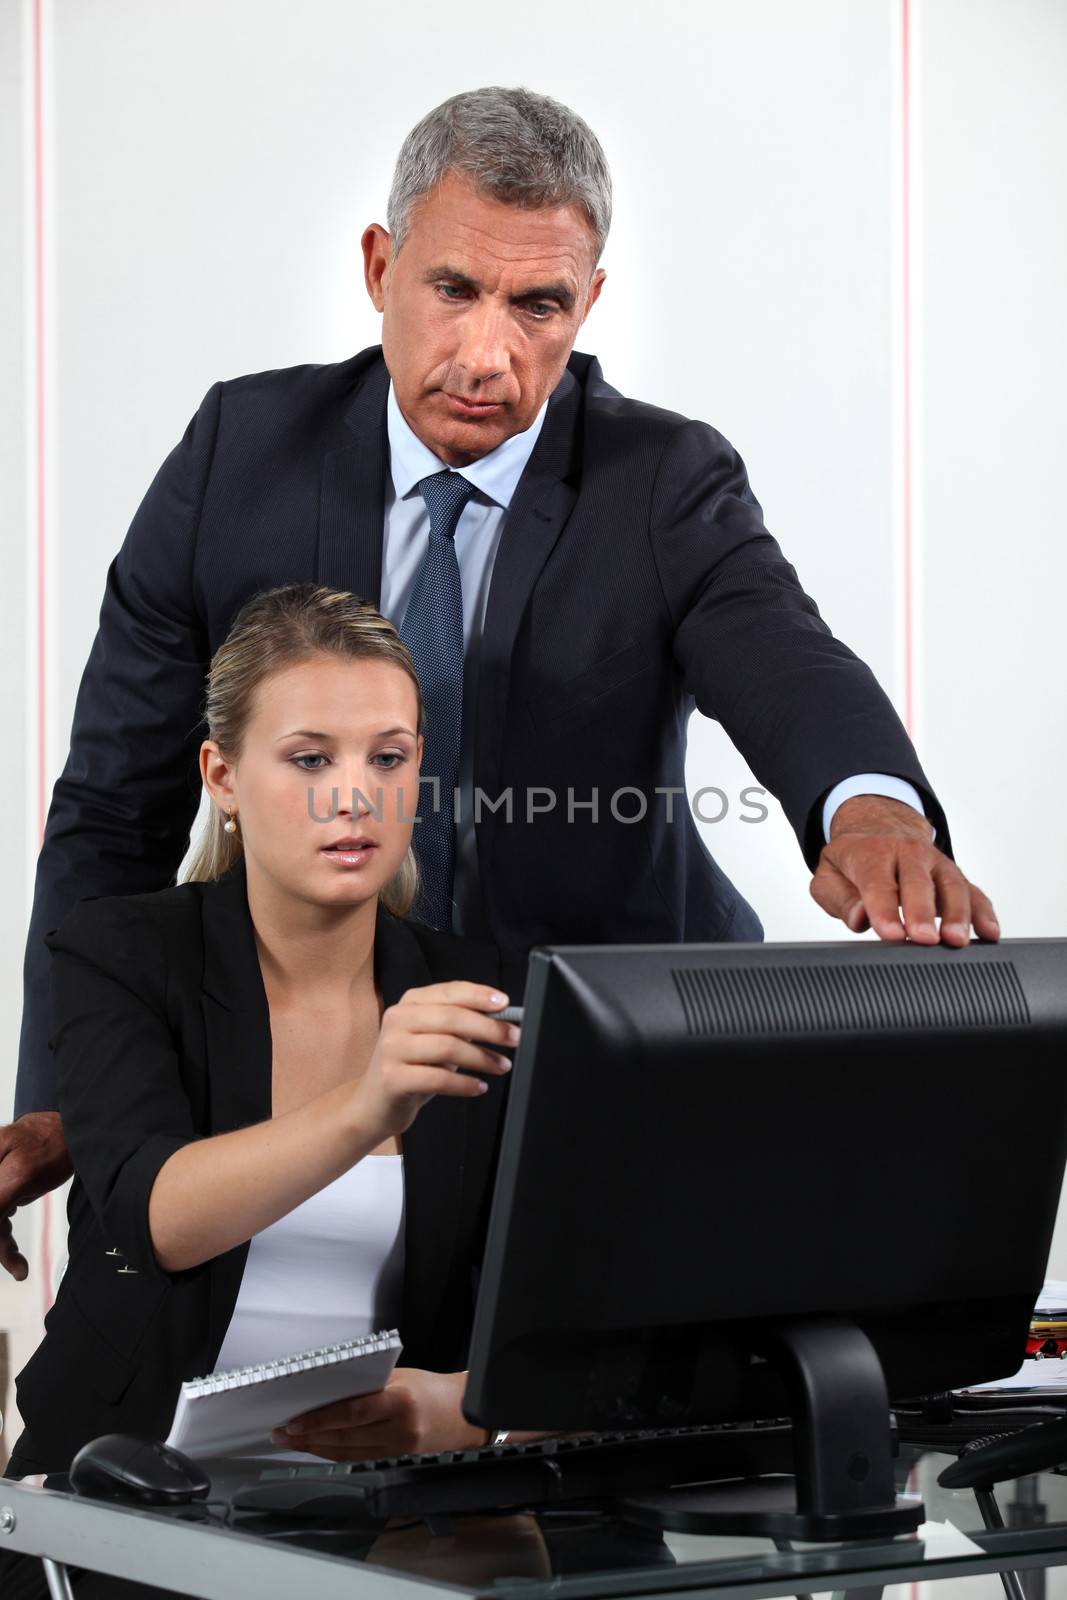 Personal assistant asking her boss a question